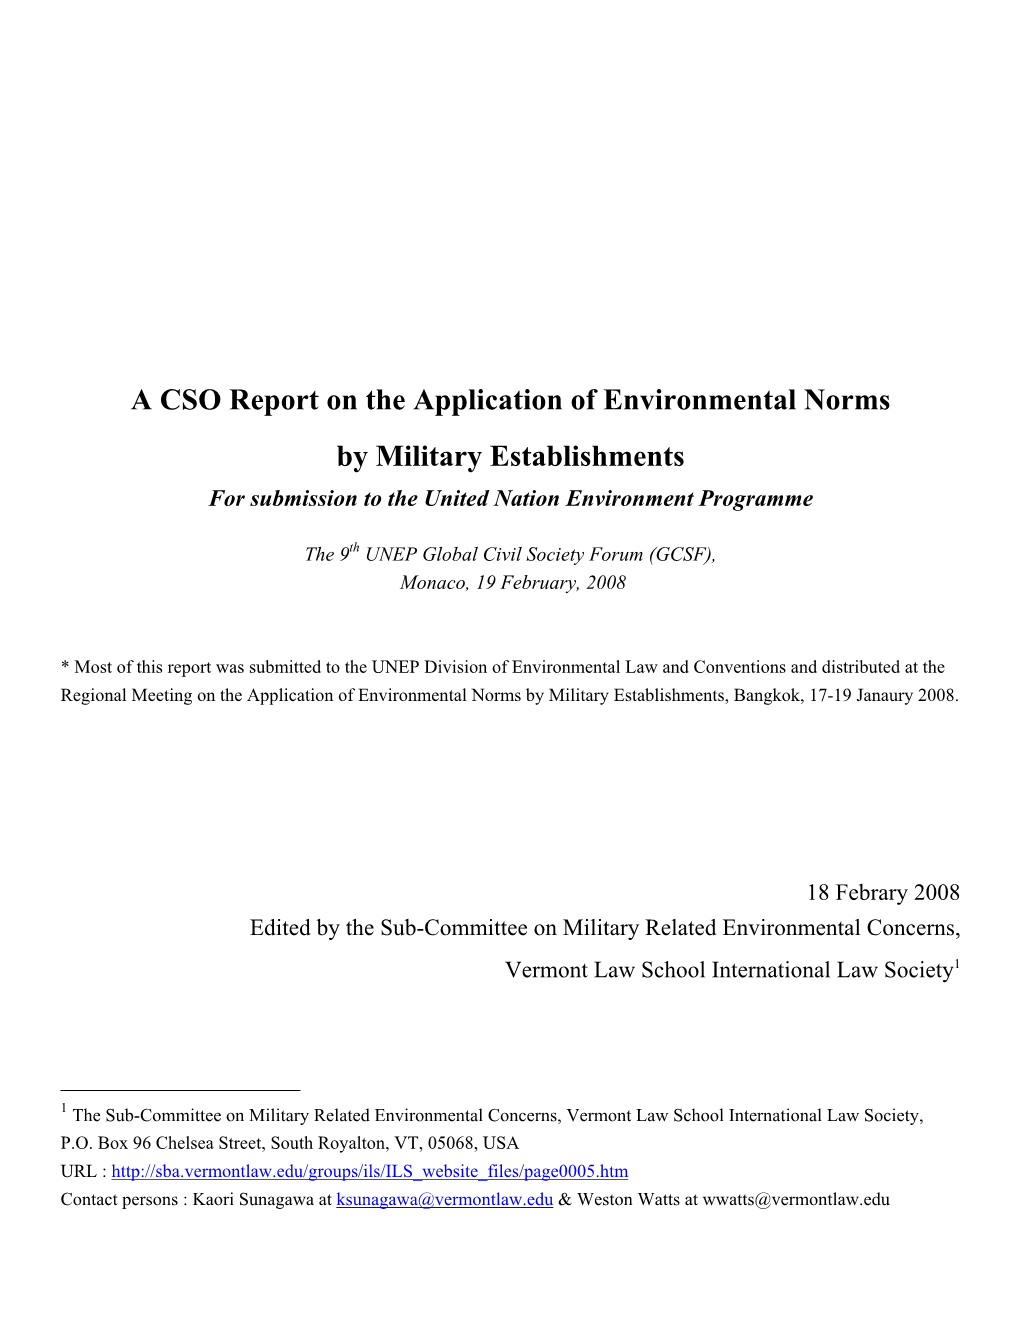 A CSO Report on the Application of Environmental Norms by Military Establishments for Submission to the United Nation Environment Programme